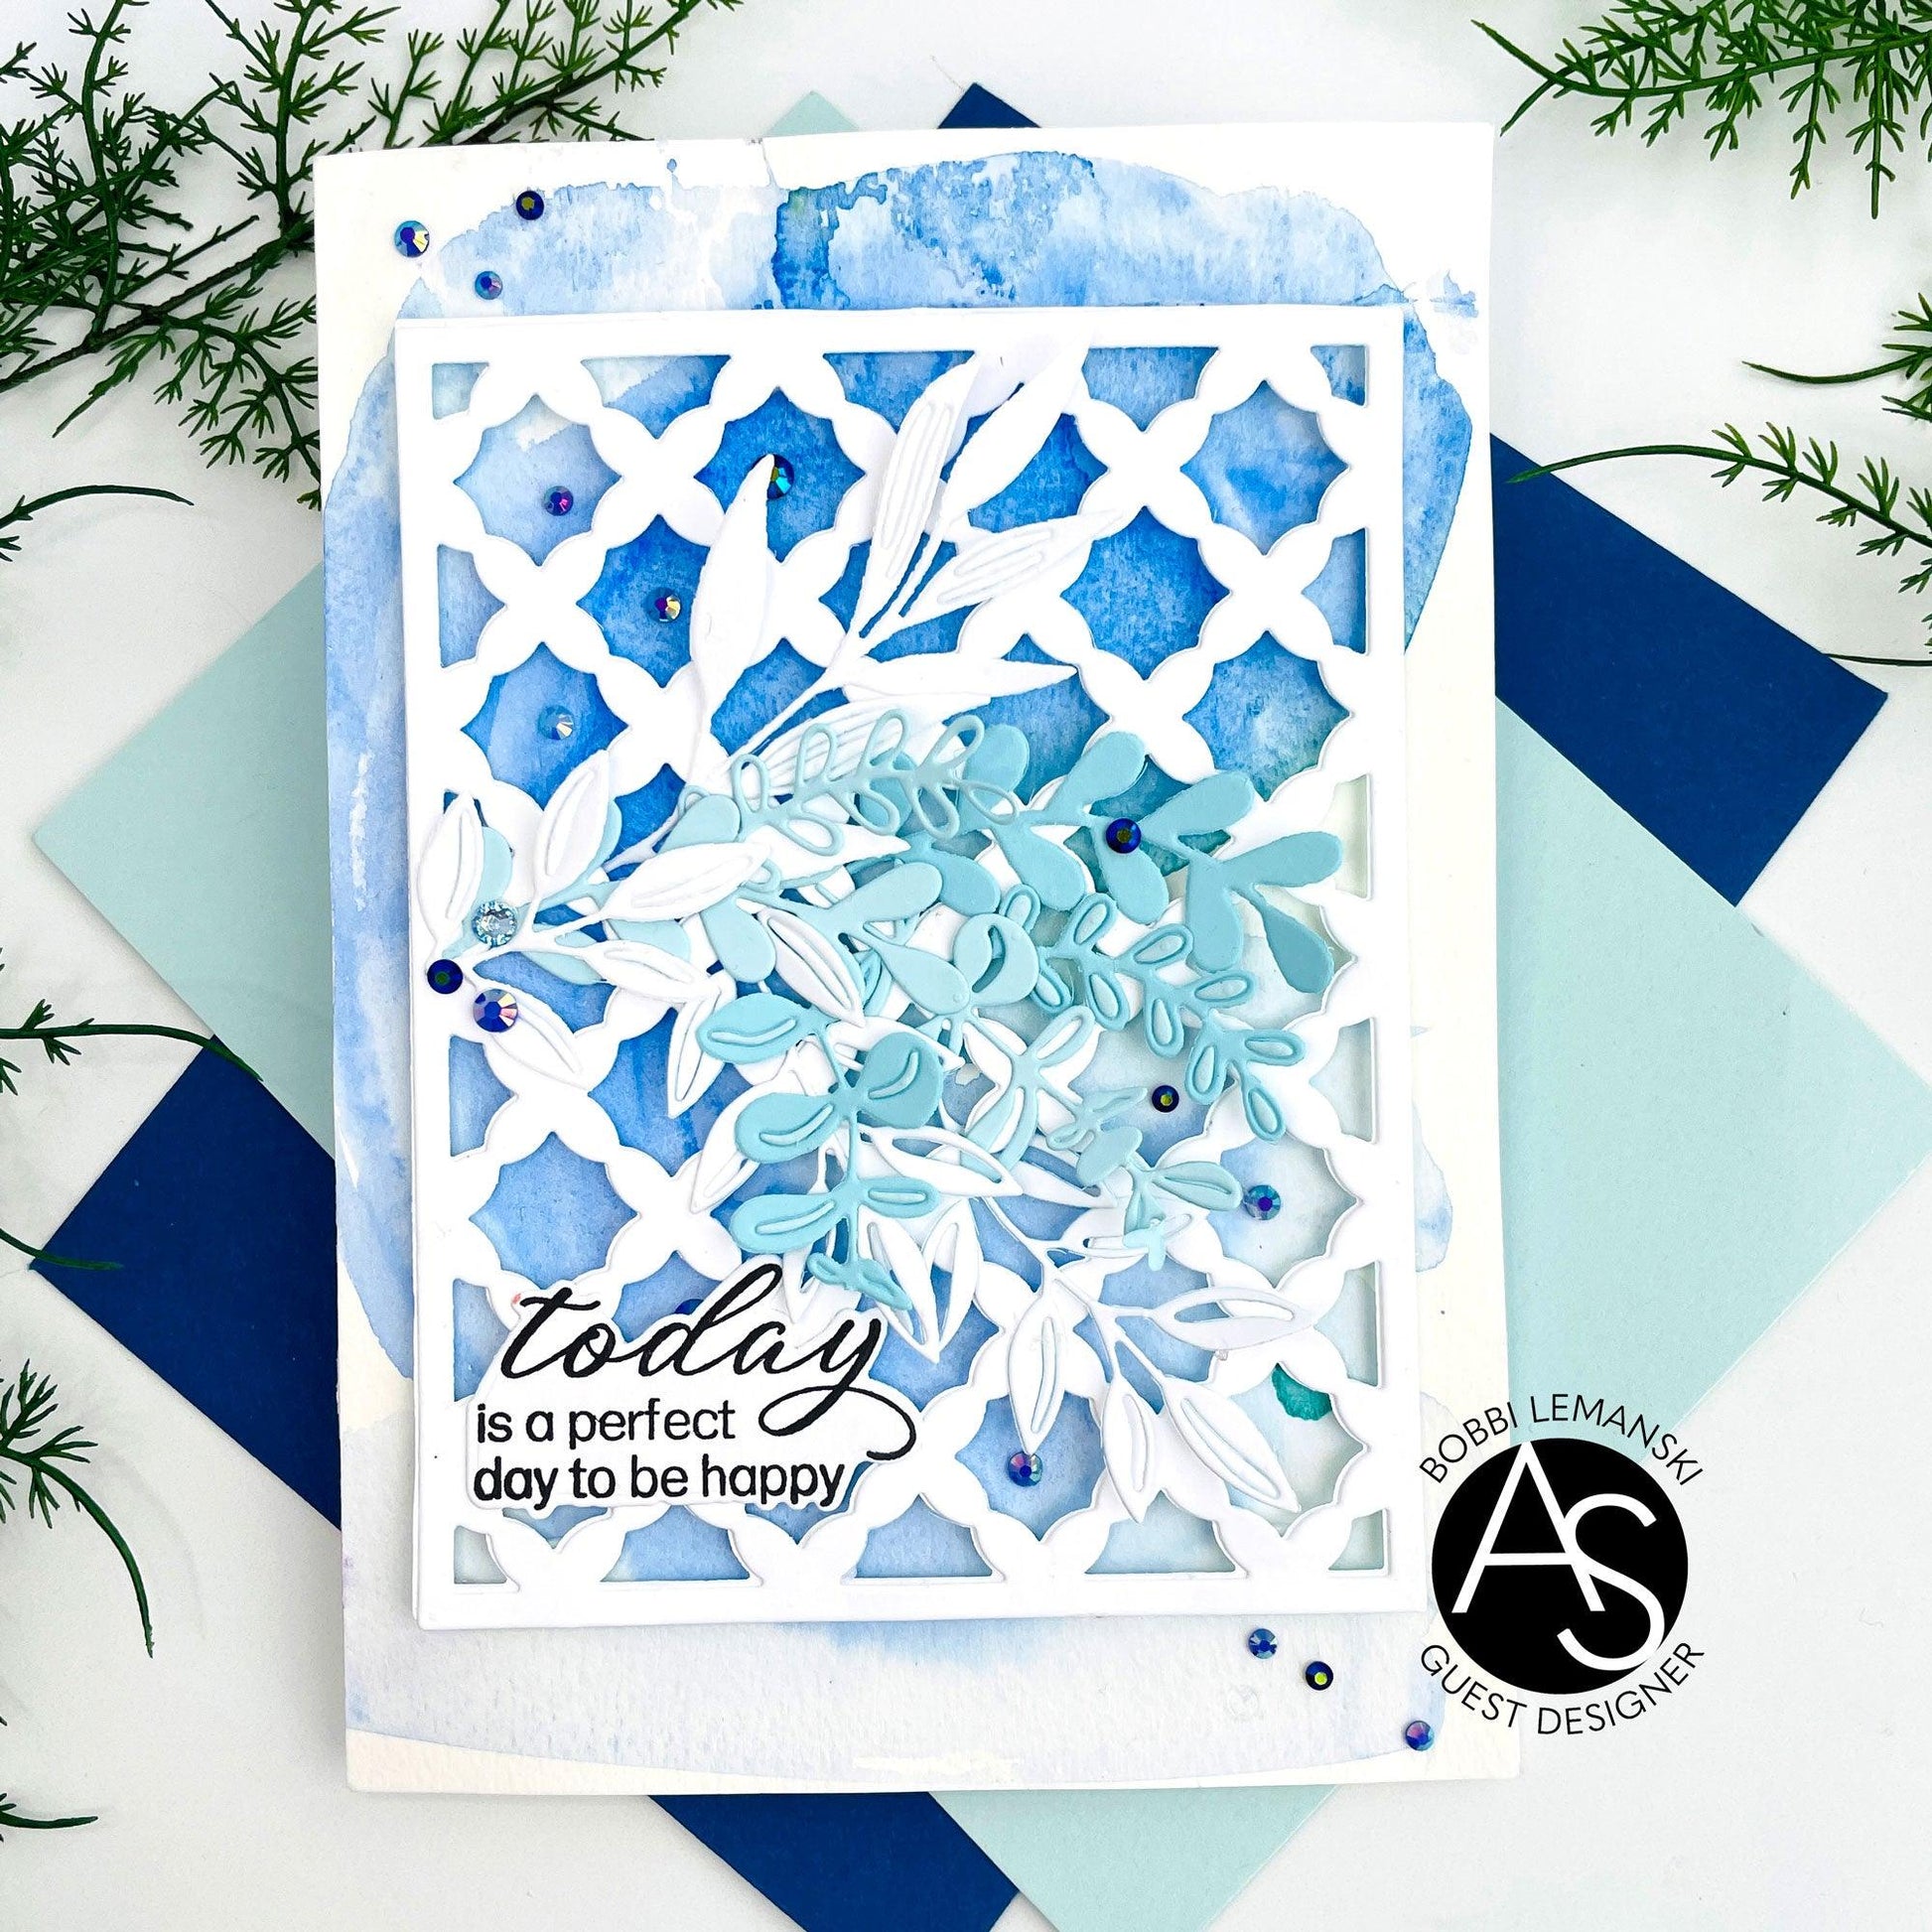 Floral-Lattice-Cover-Die-alex-syberia-designs-cardmaking-stamps-hotfoils-tutoral-new-release-february-handmadecards